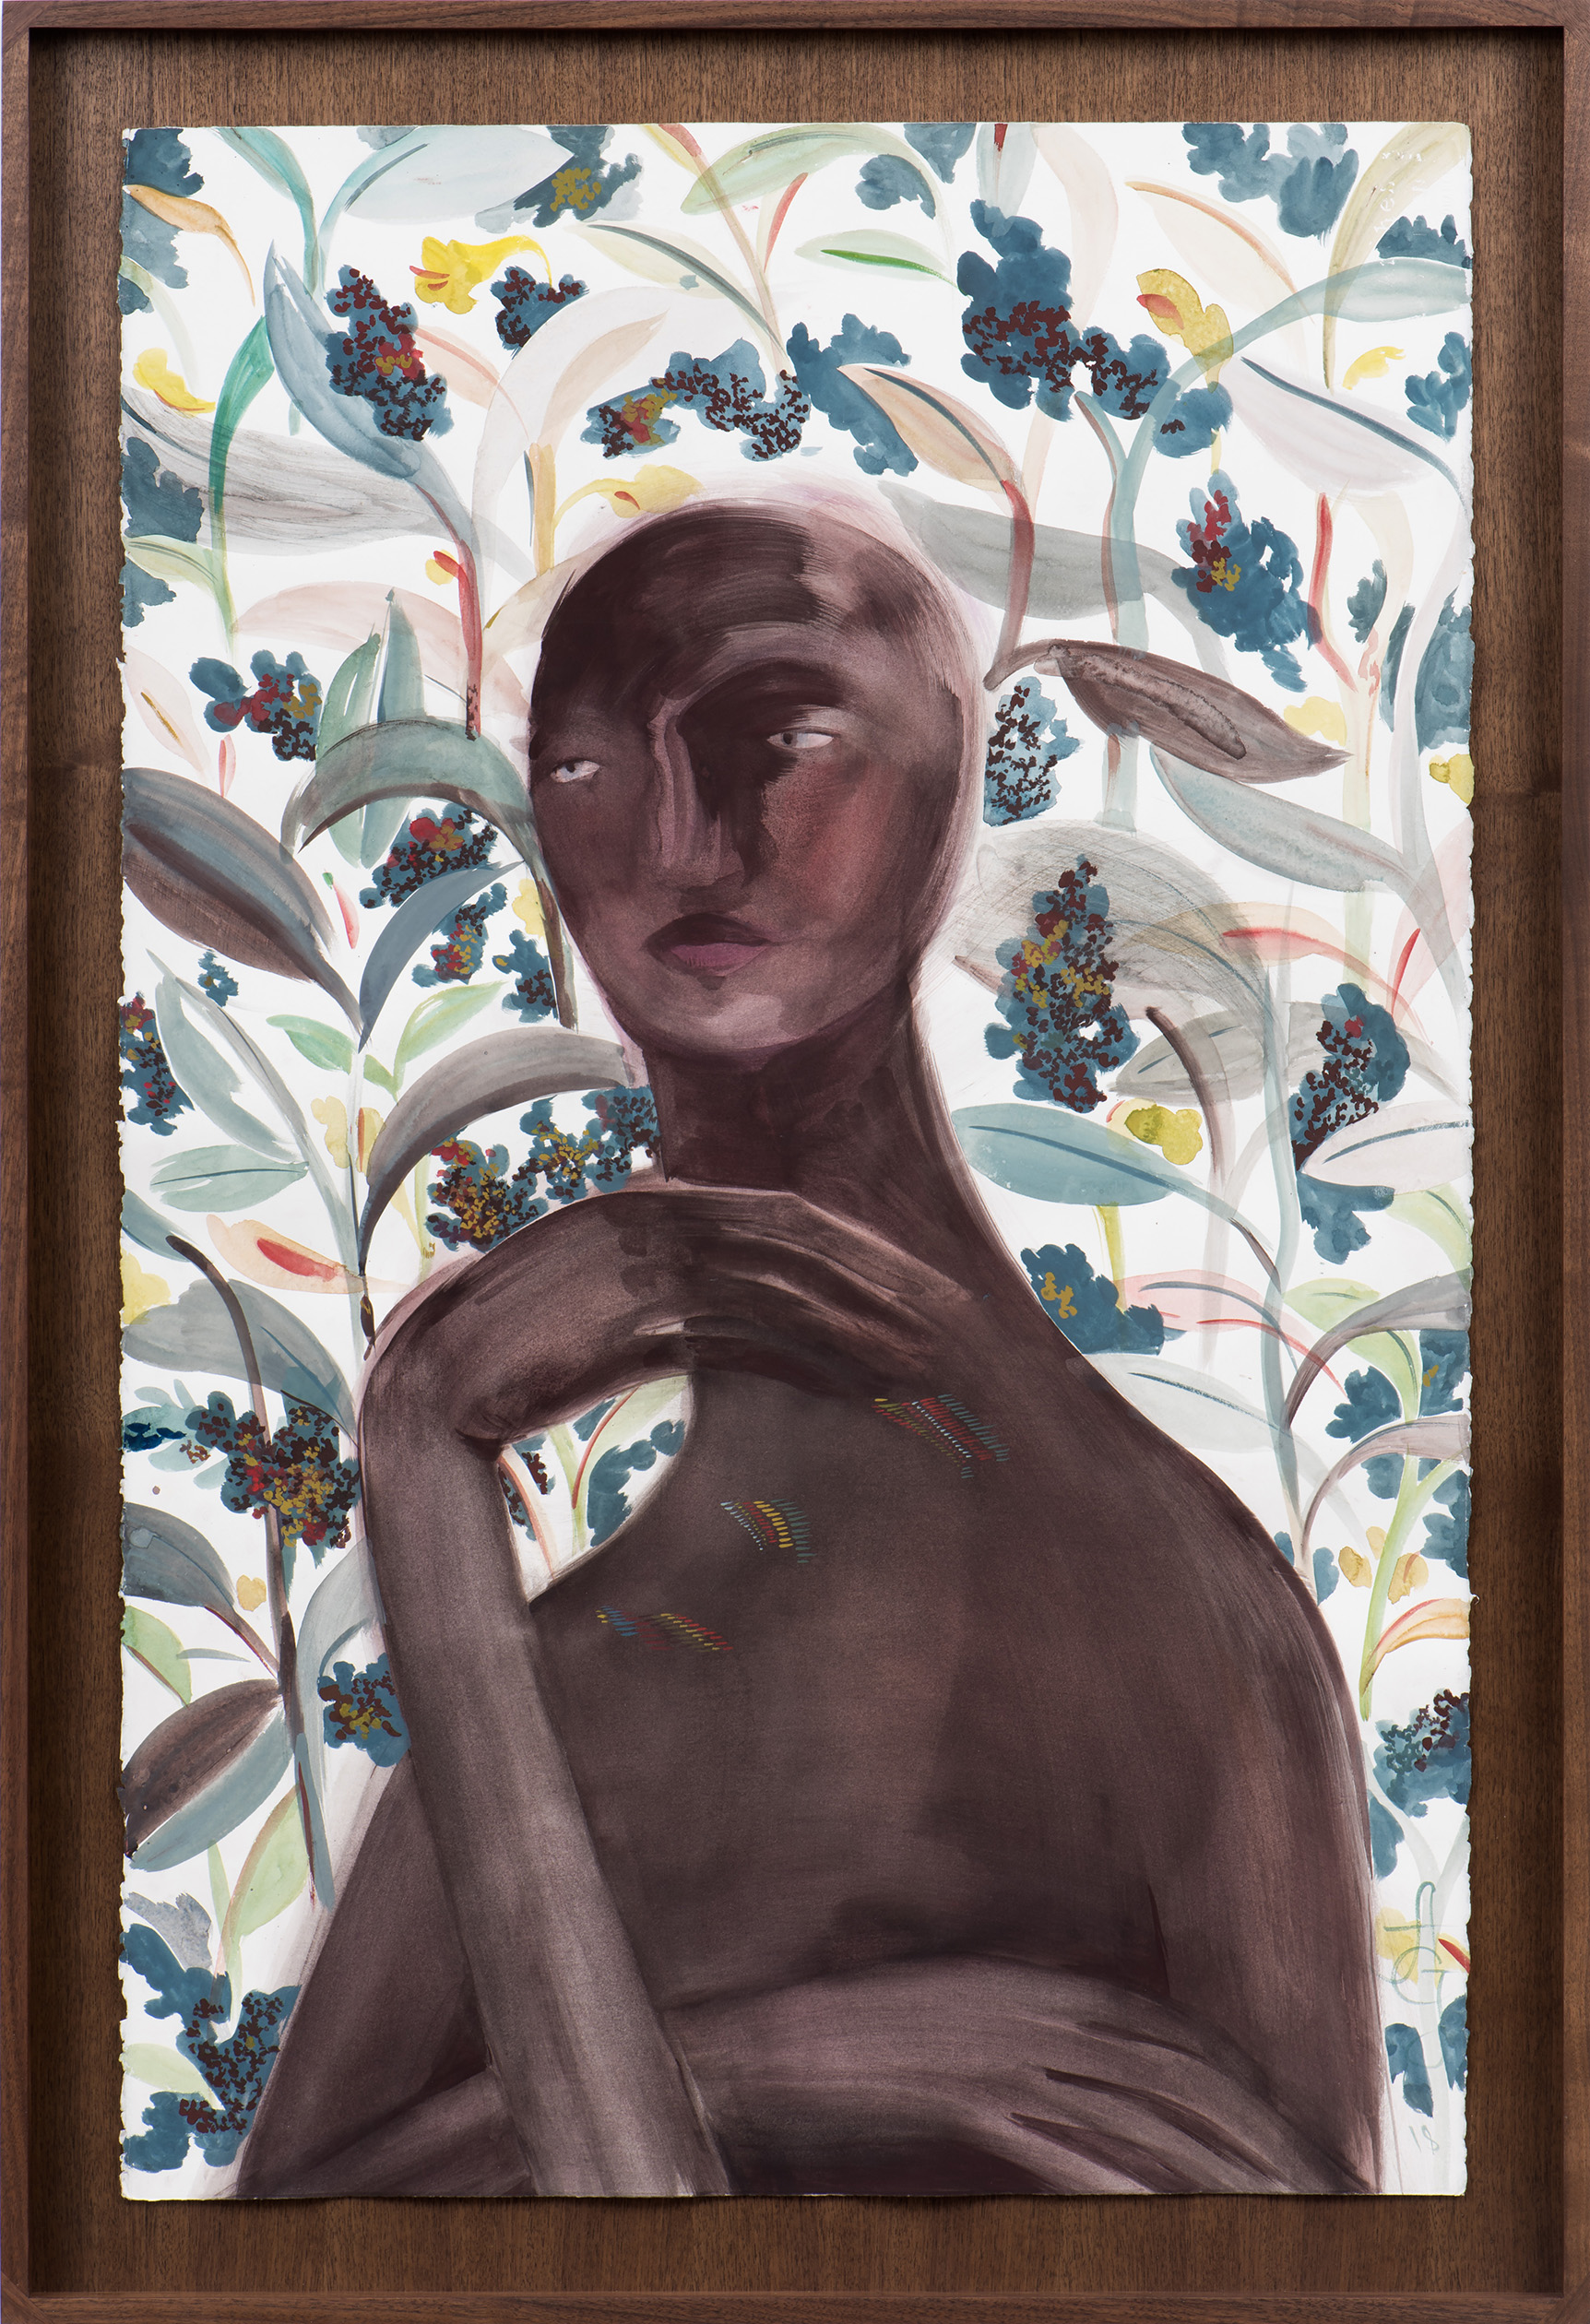   Abel , 2018 Gouache and watercolor on paper 44 x 30 1/2 inches (framed) 